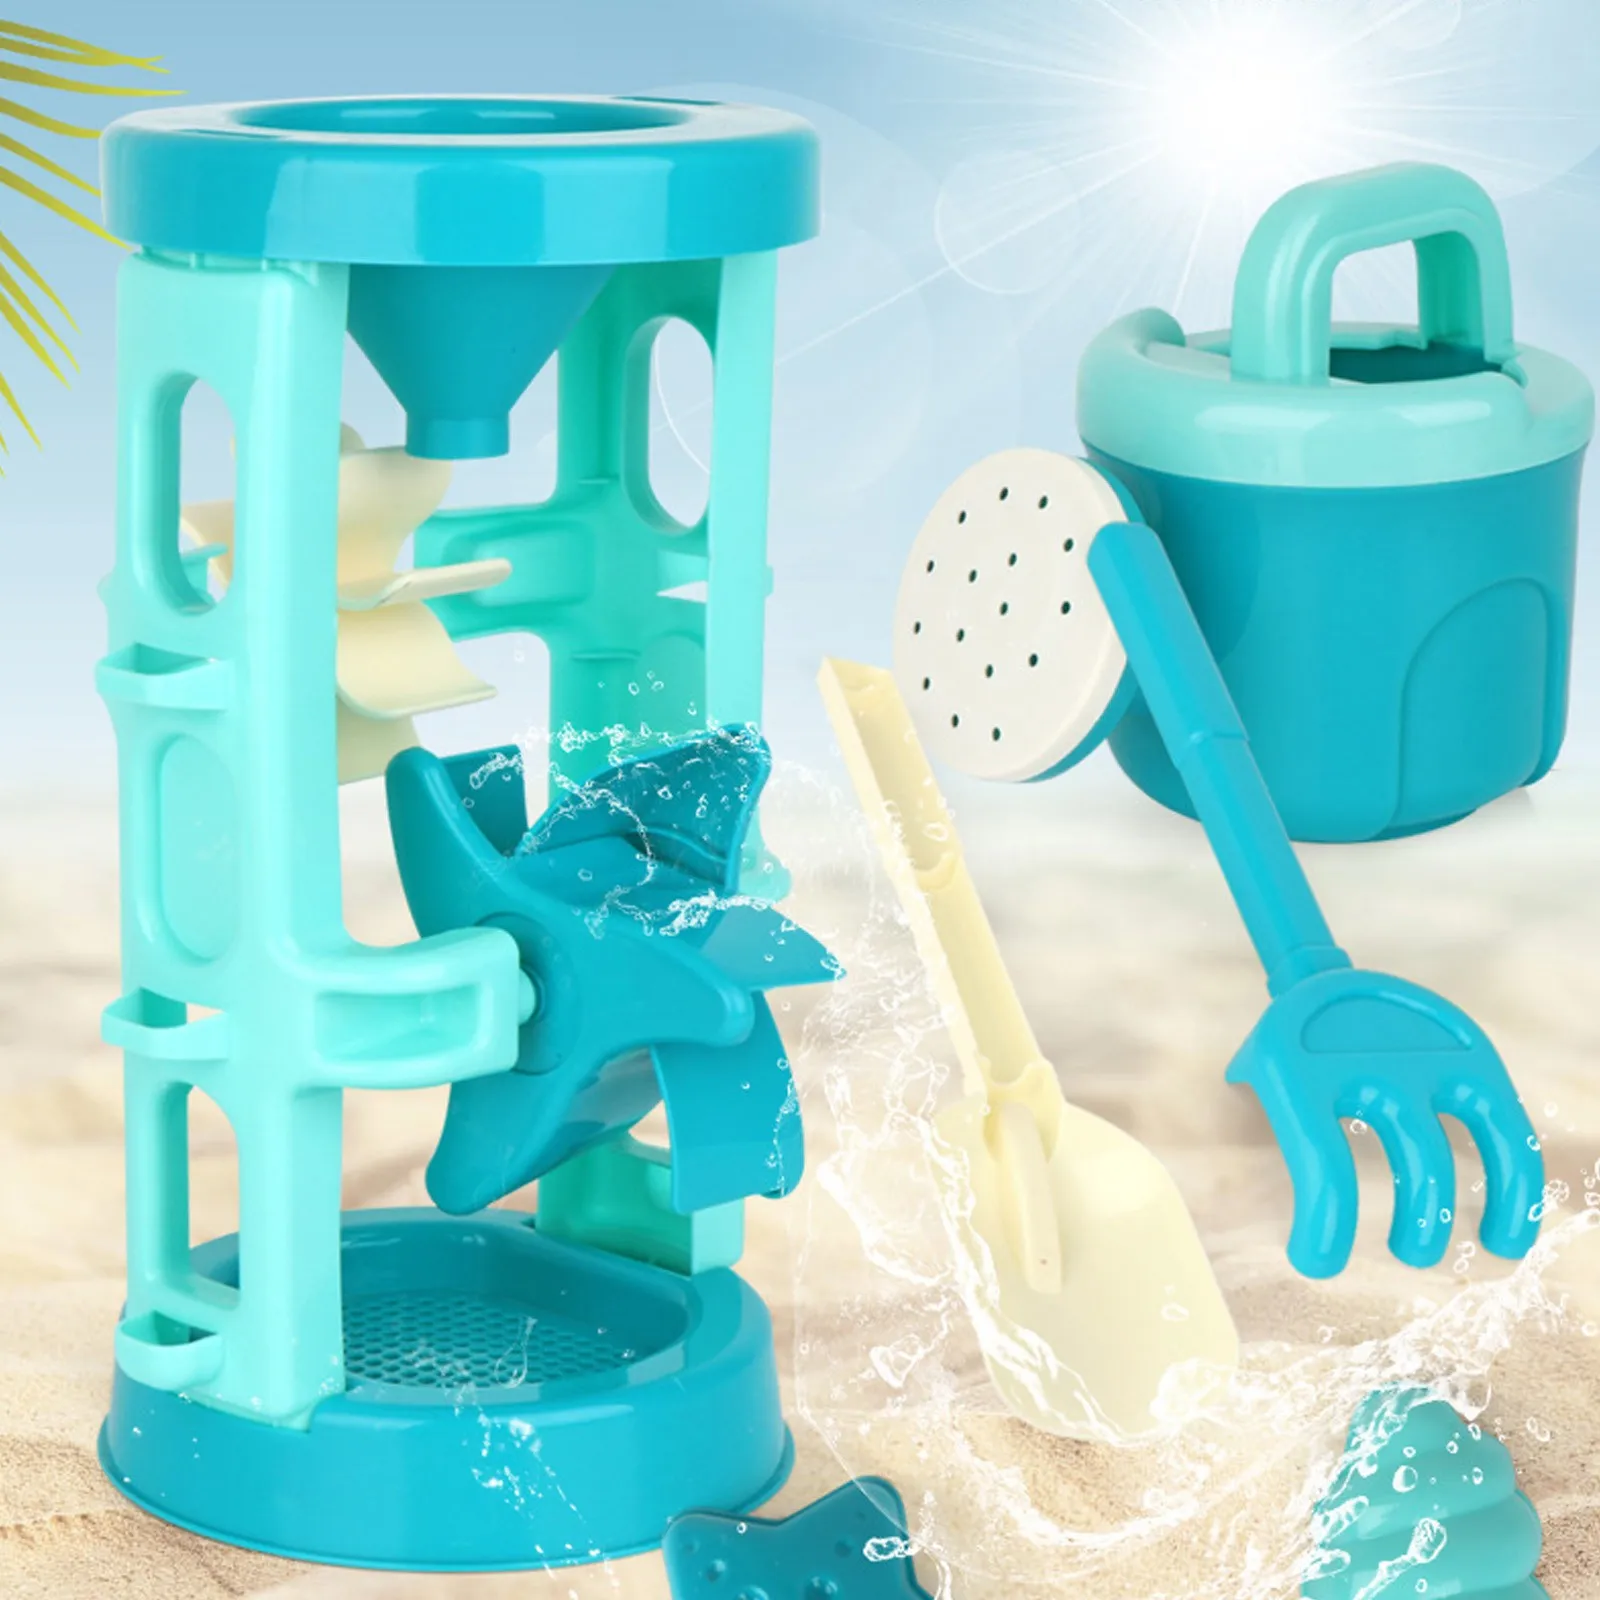 

Beach Toy Sand Set Sand Play Sandpit Toy Summer Outdoor Toy for Boys and Girls Sandglass Shovel Tool Sand Bucket Toy